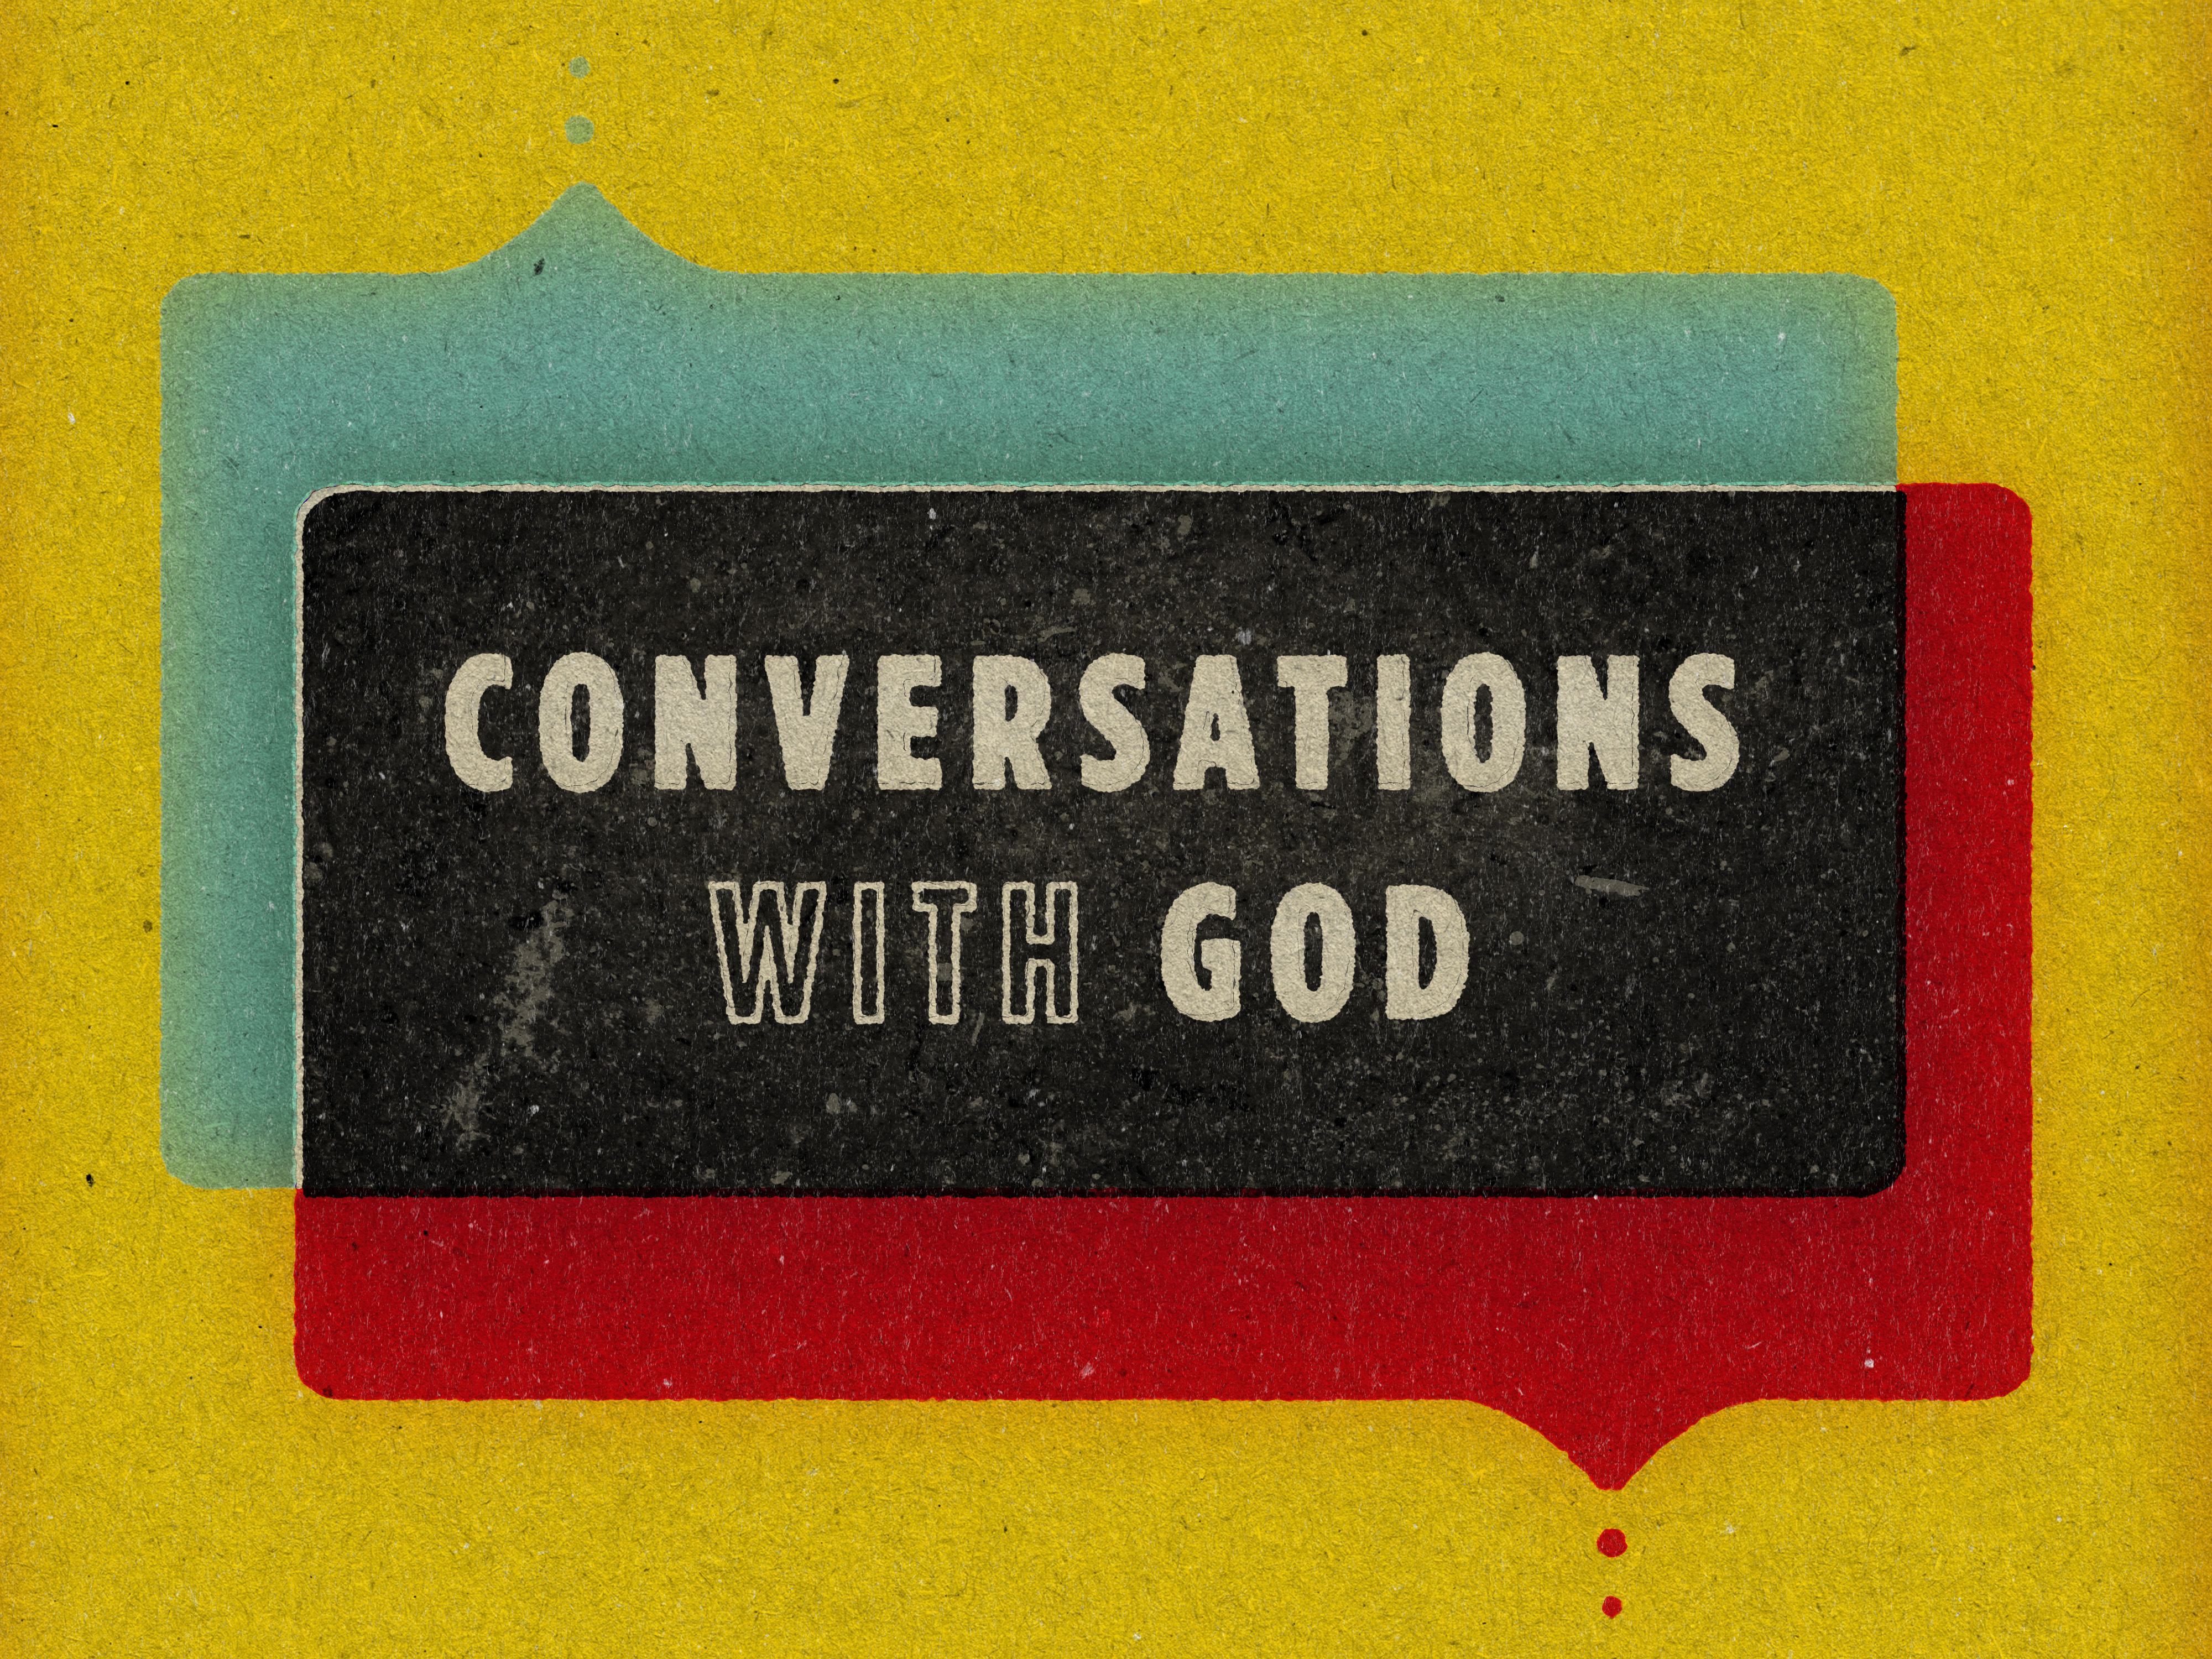 conversations with god book 1 review